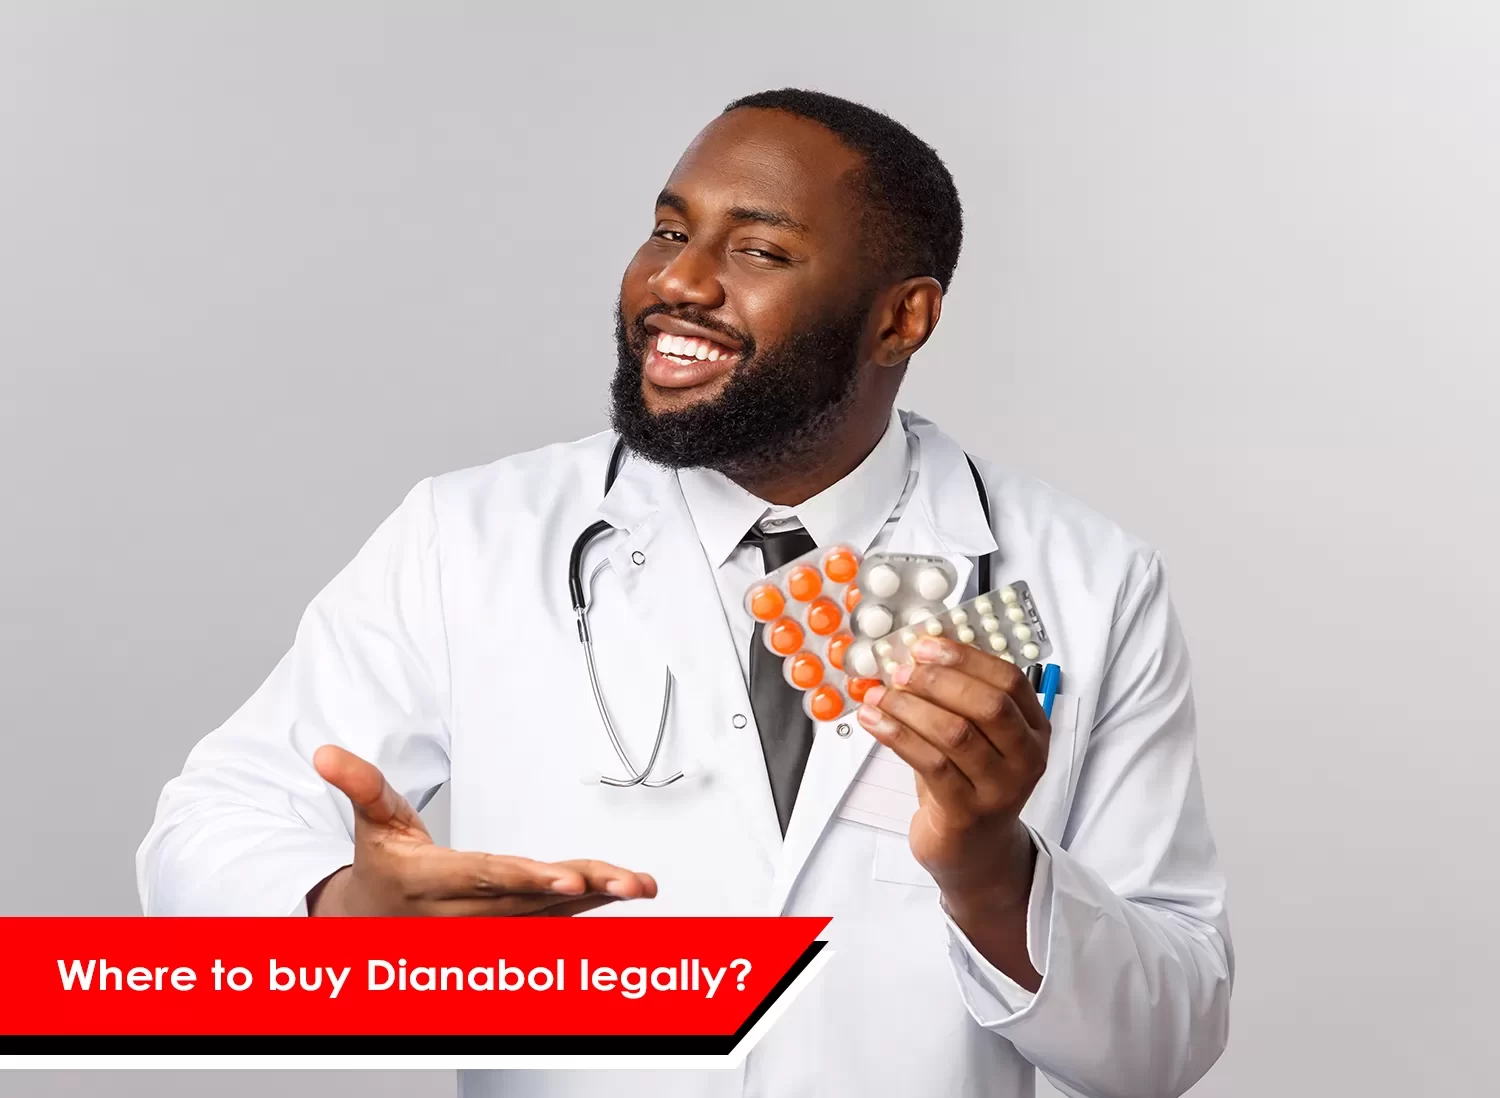 Where to buy Dianabol legally